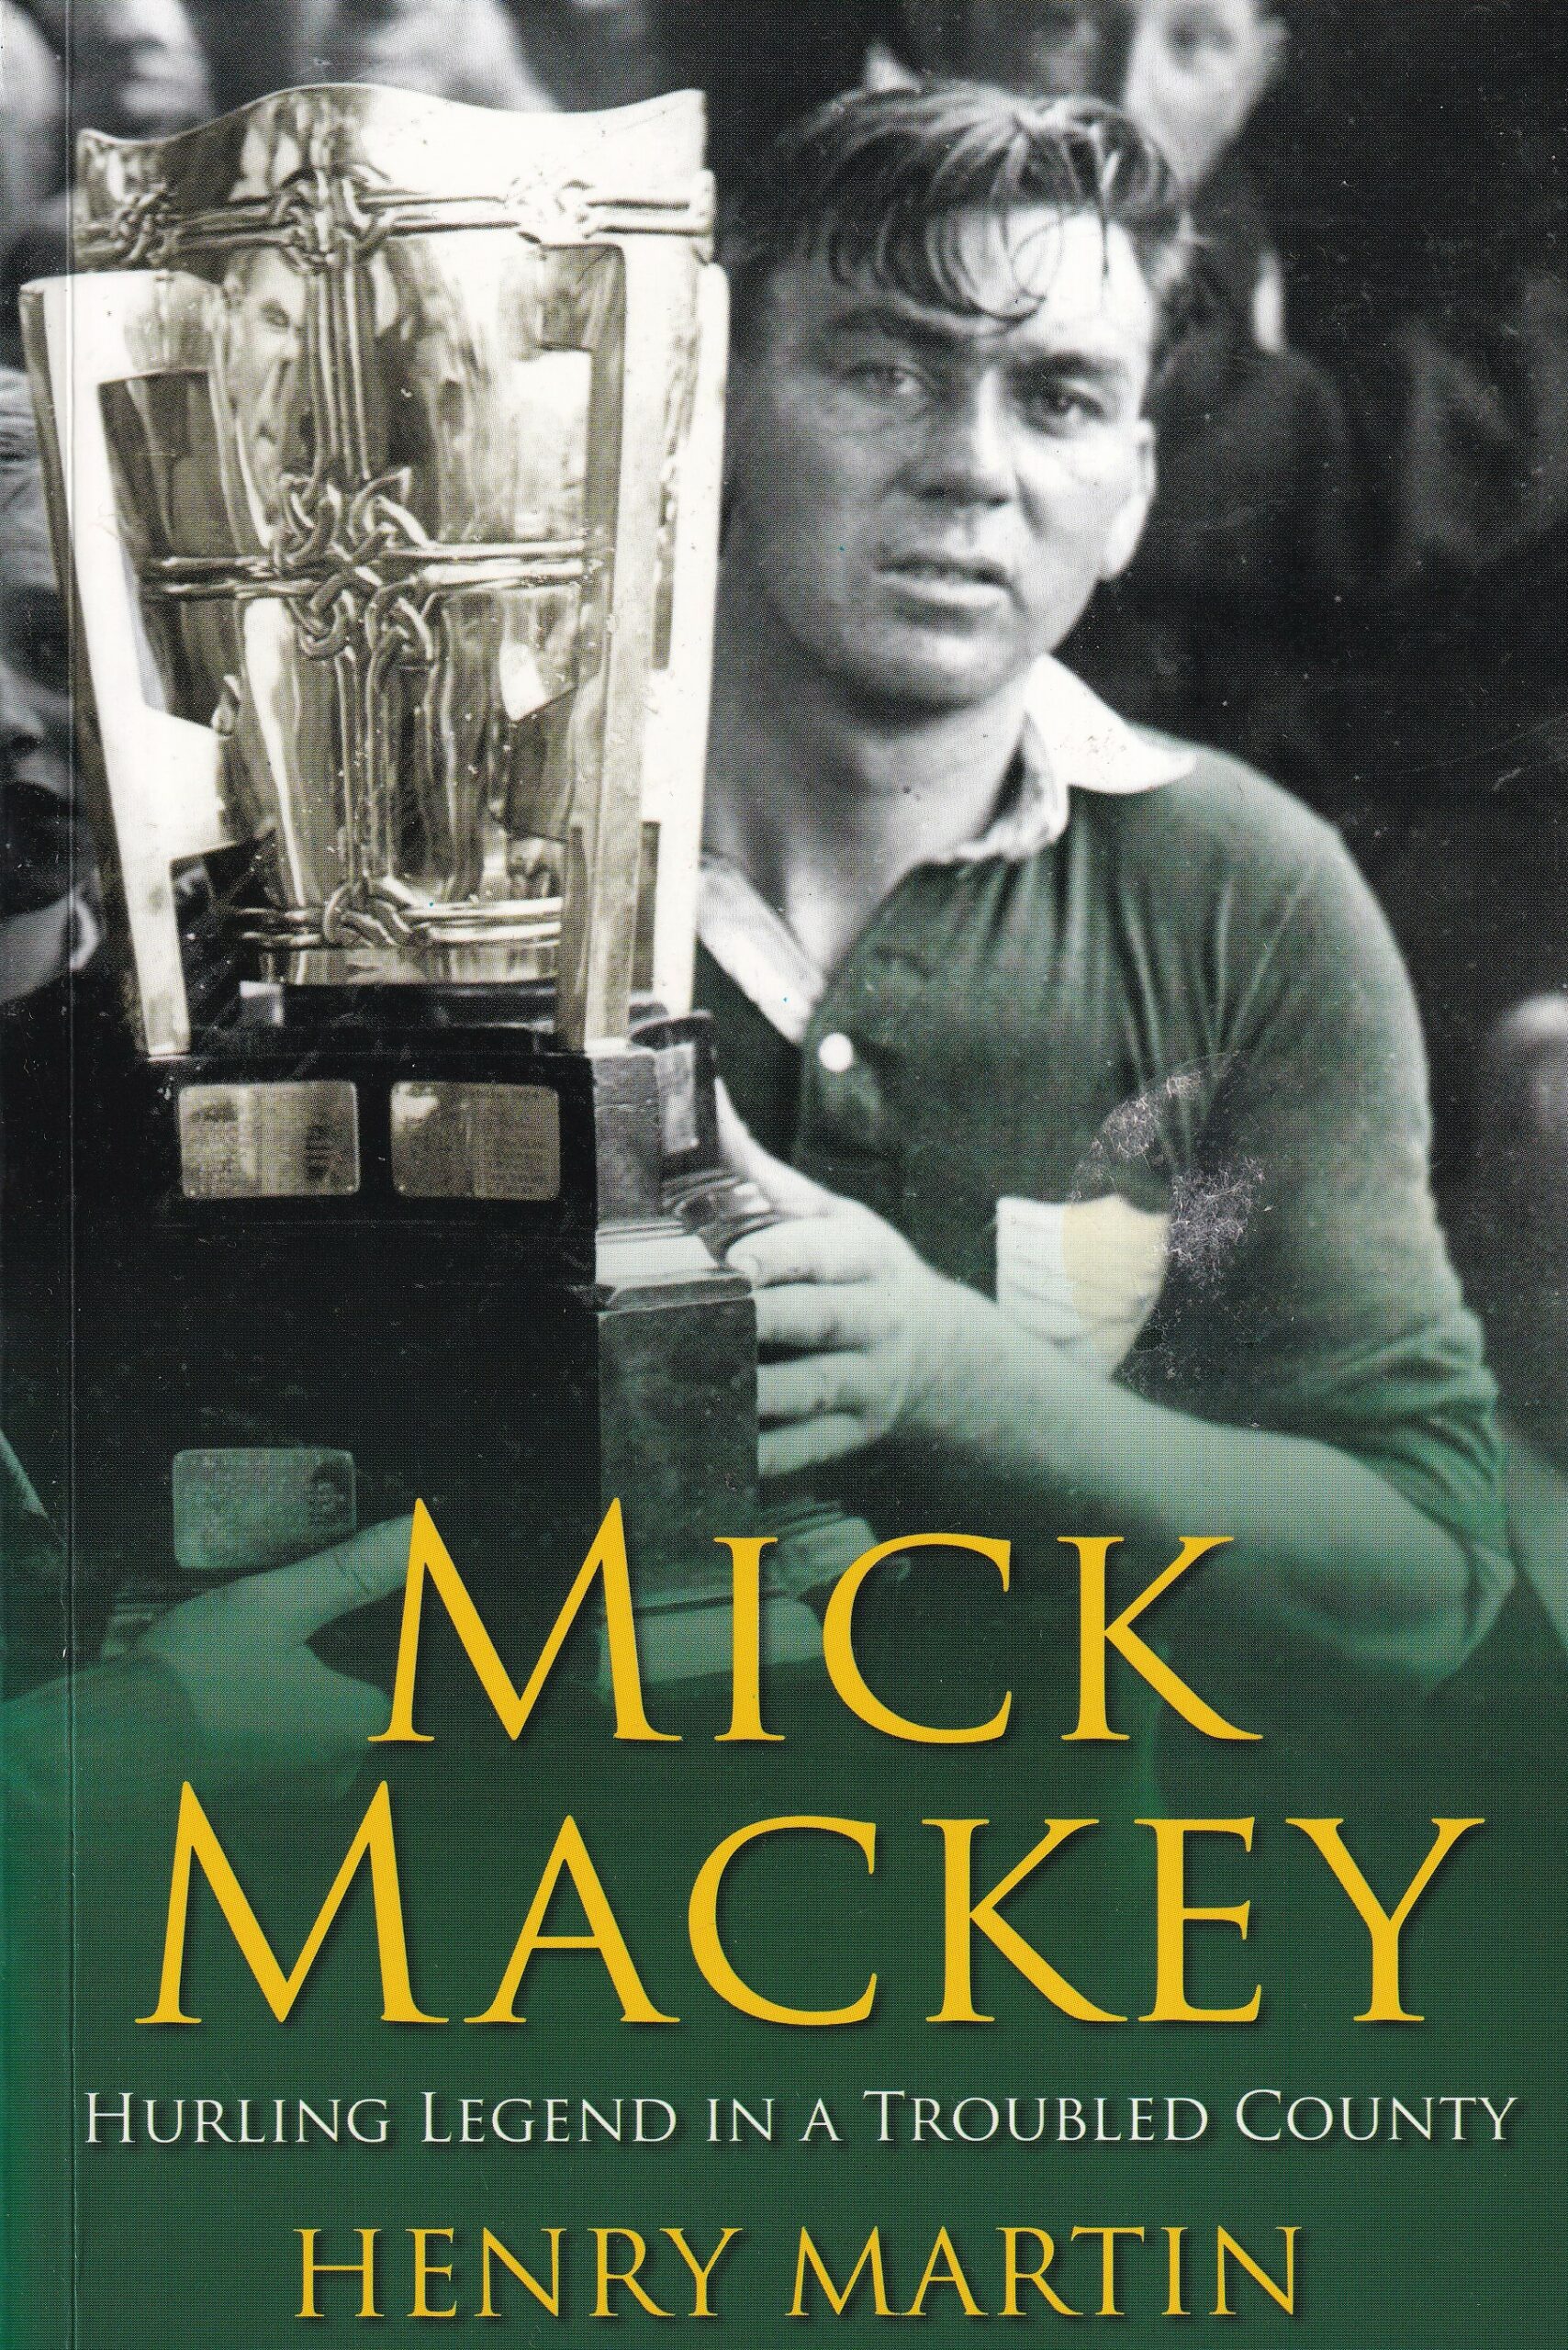 Mick Mackey: Hurling Legend in a Troubled County by Henry Martin